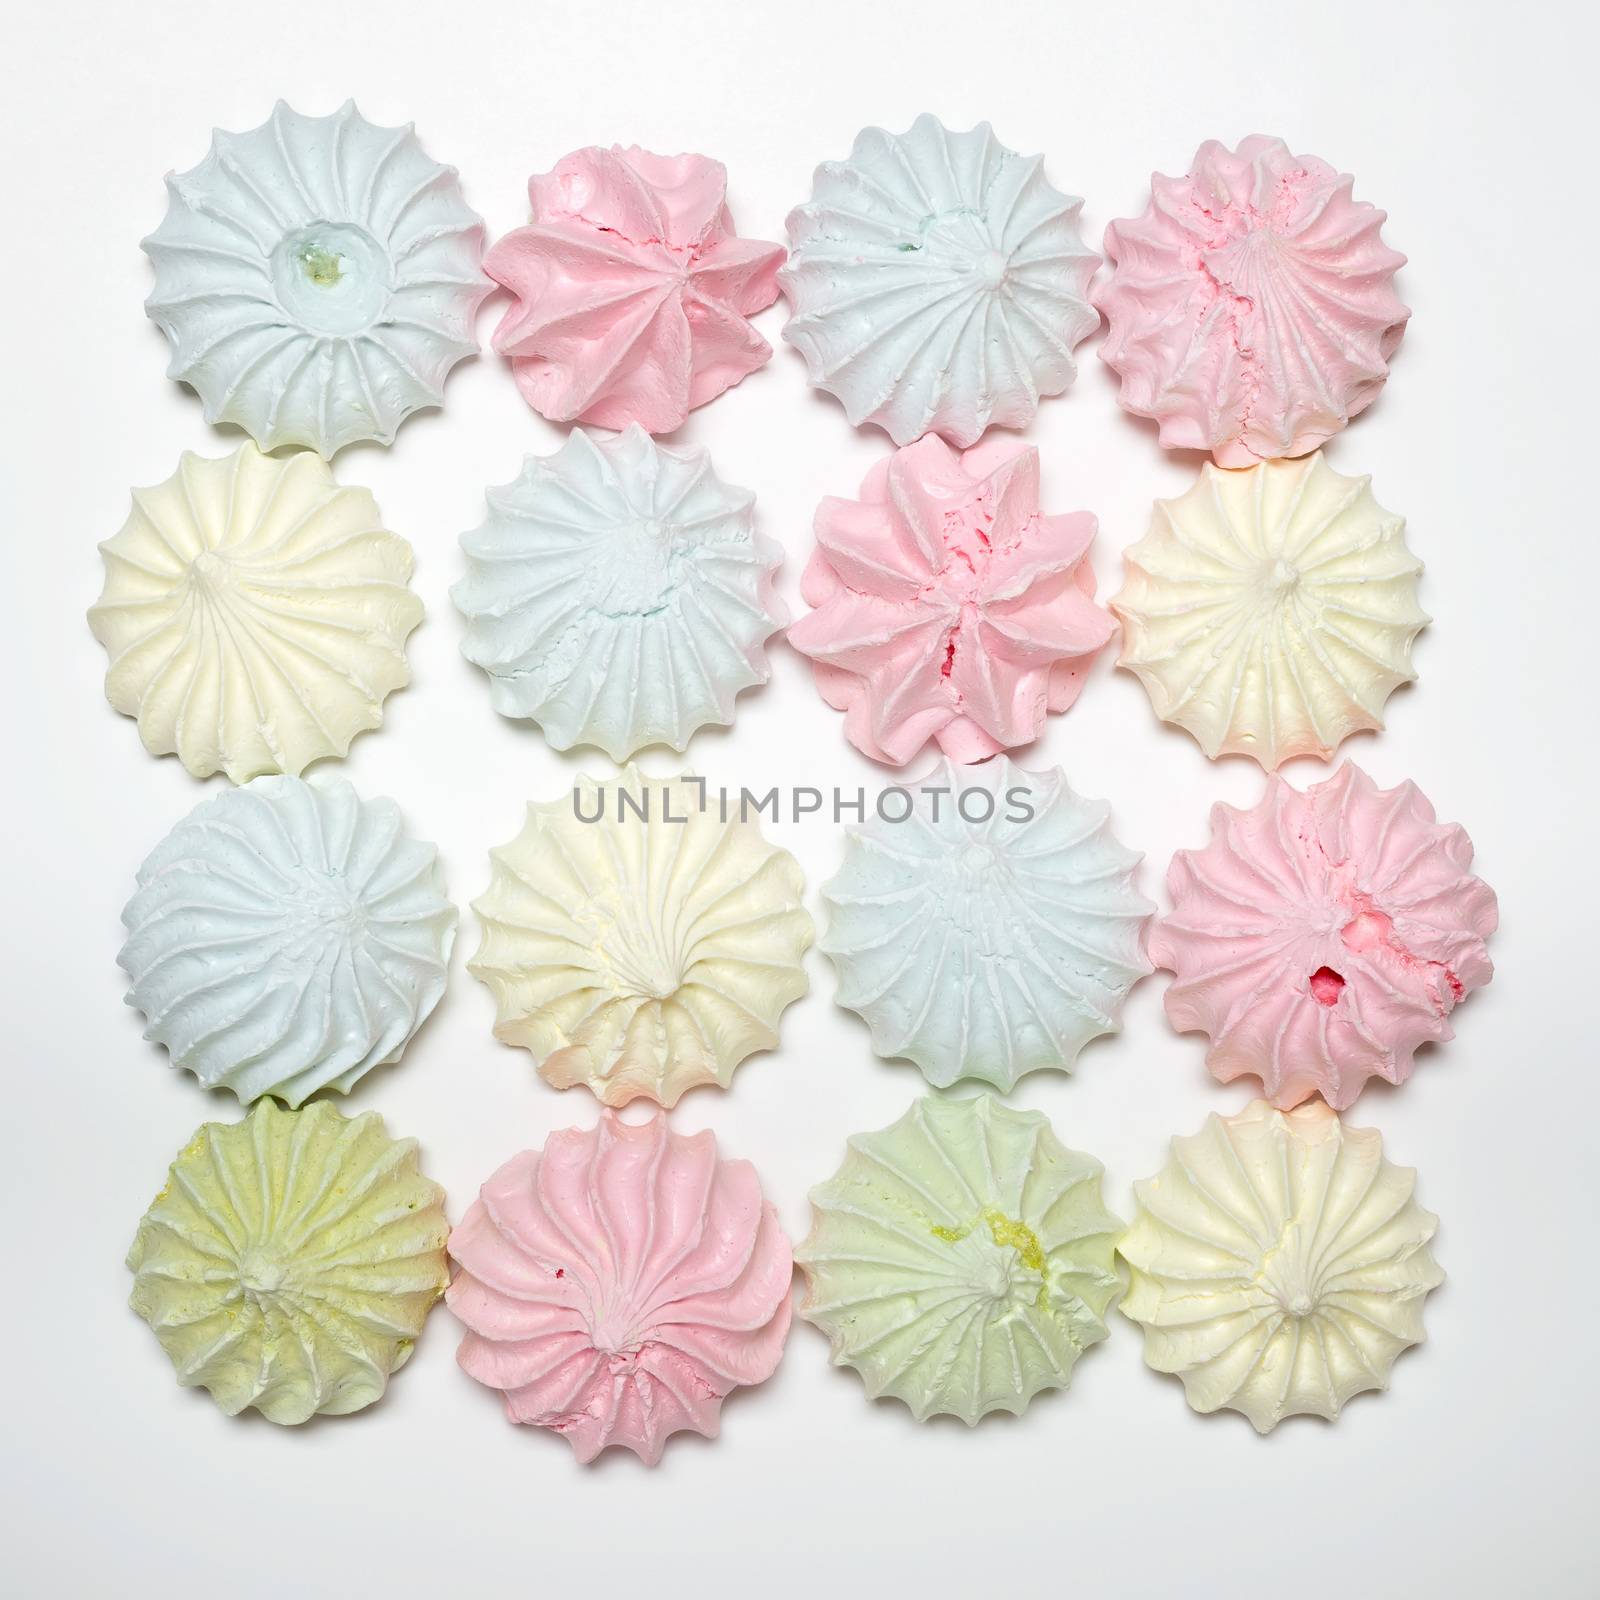 Sixteen colored french meringues aligned in a square, on white background